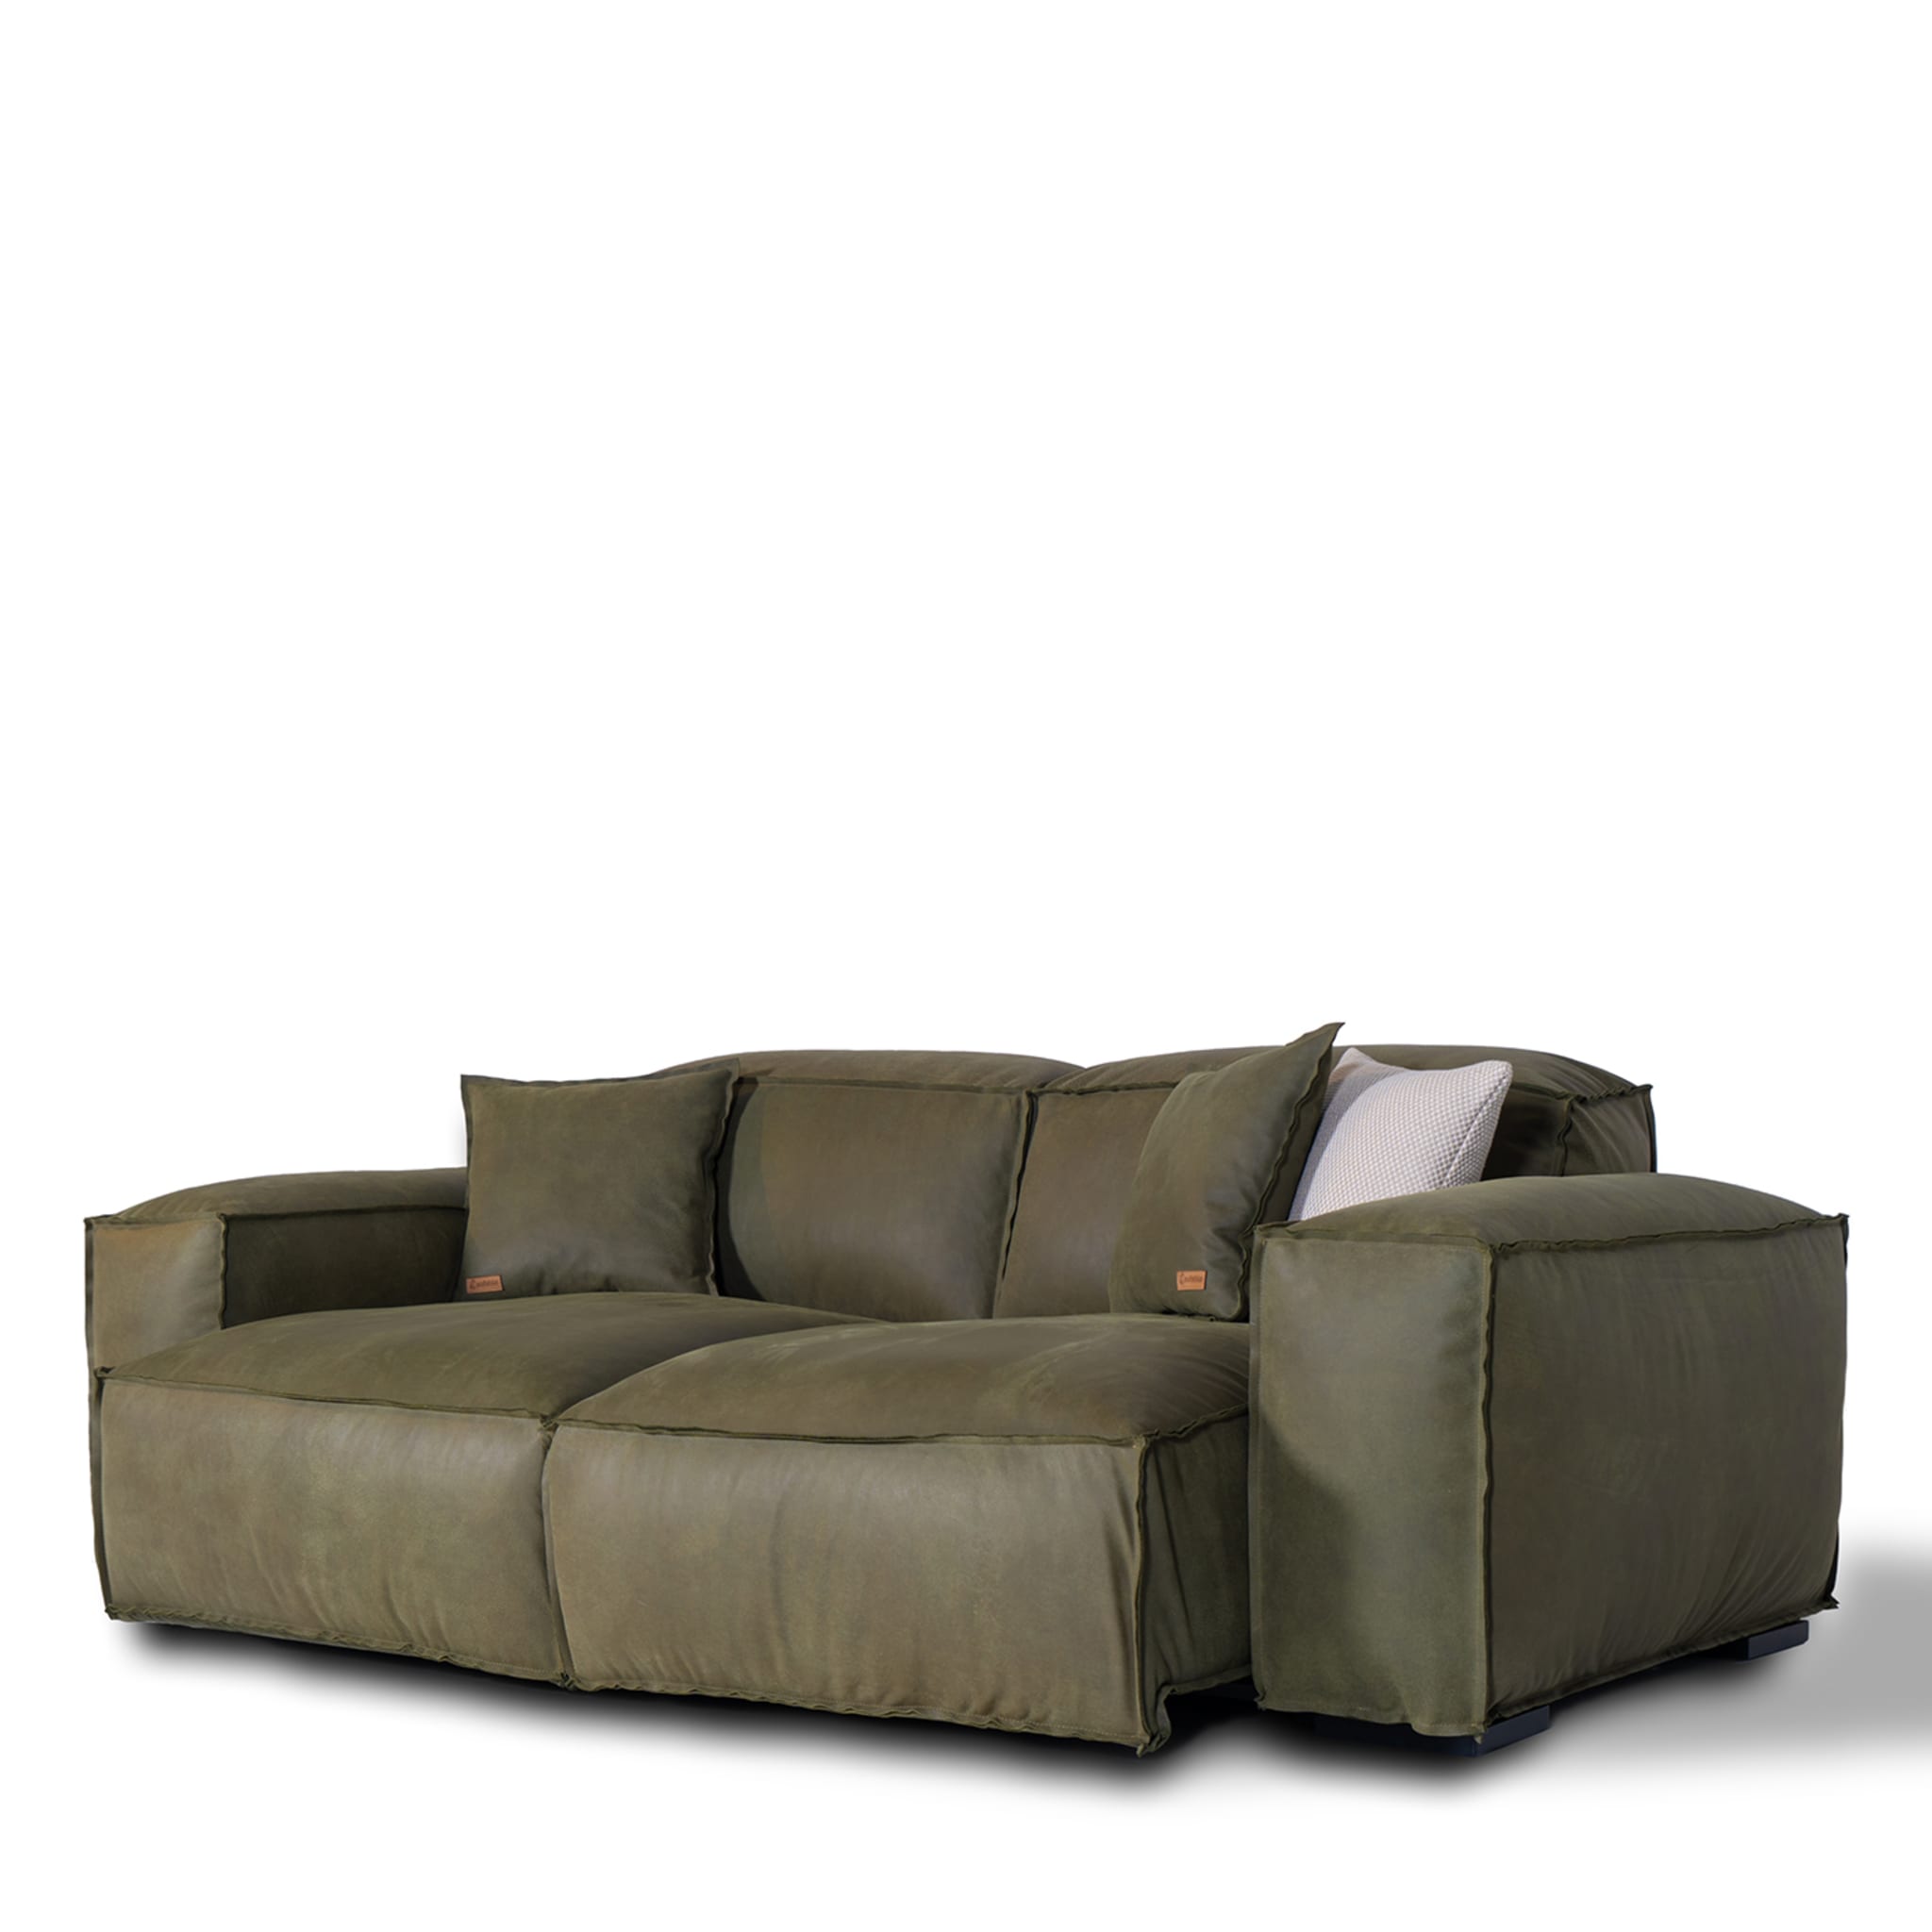 Placido Green Leather 2-Seater Maxi Sofa Tribeca collection - Alternative view 4